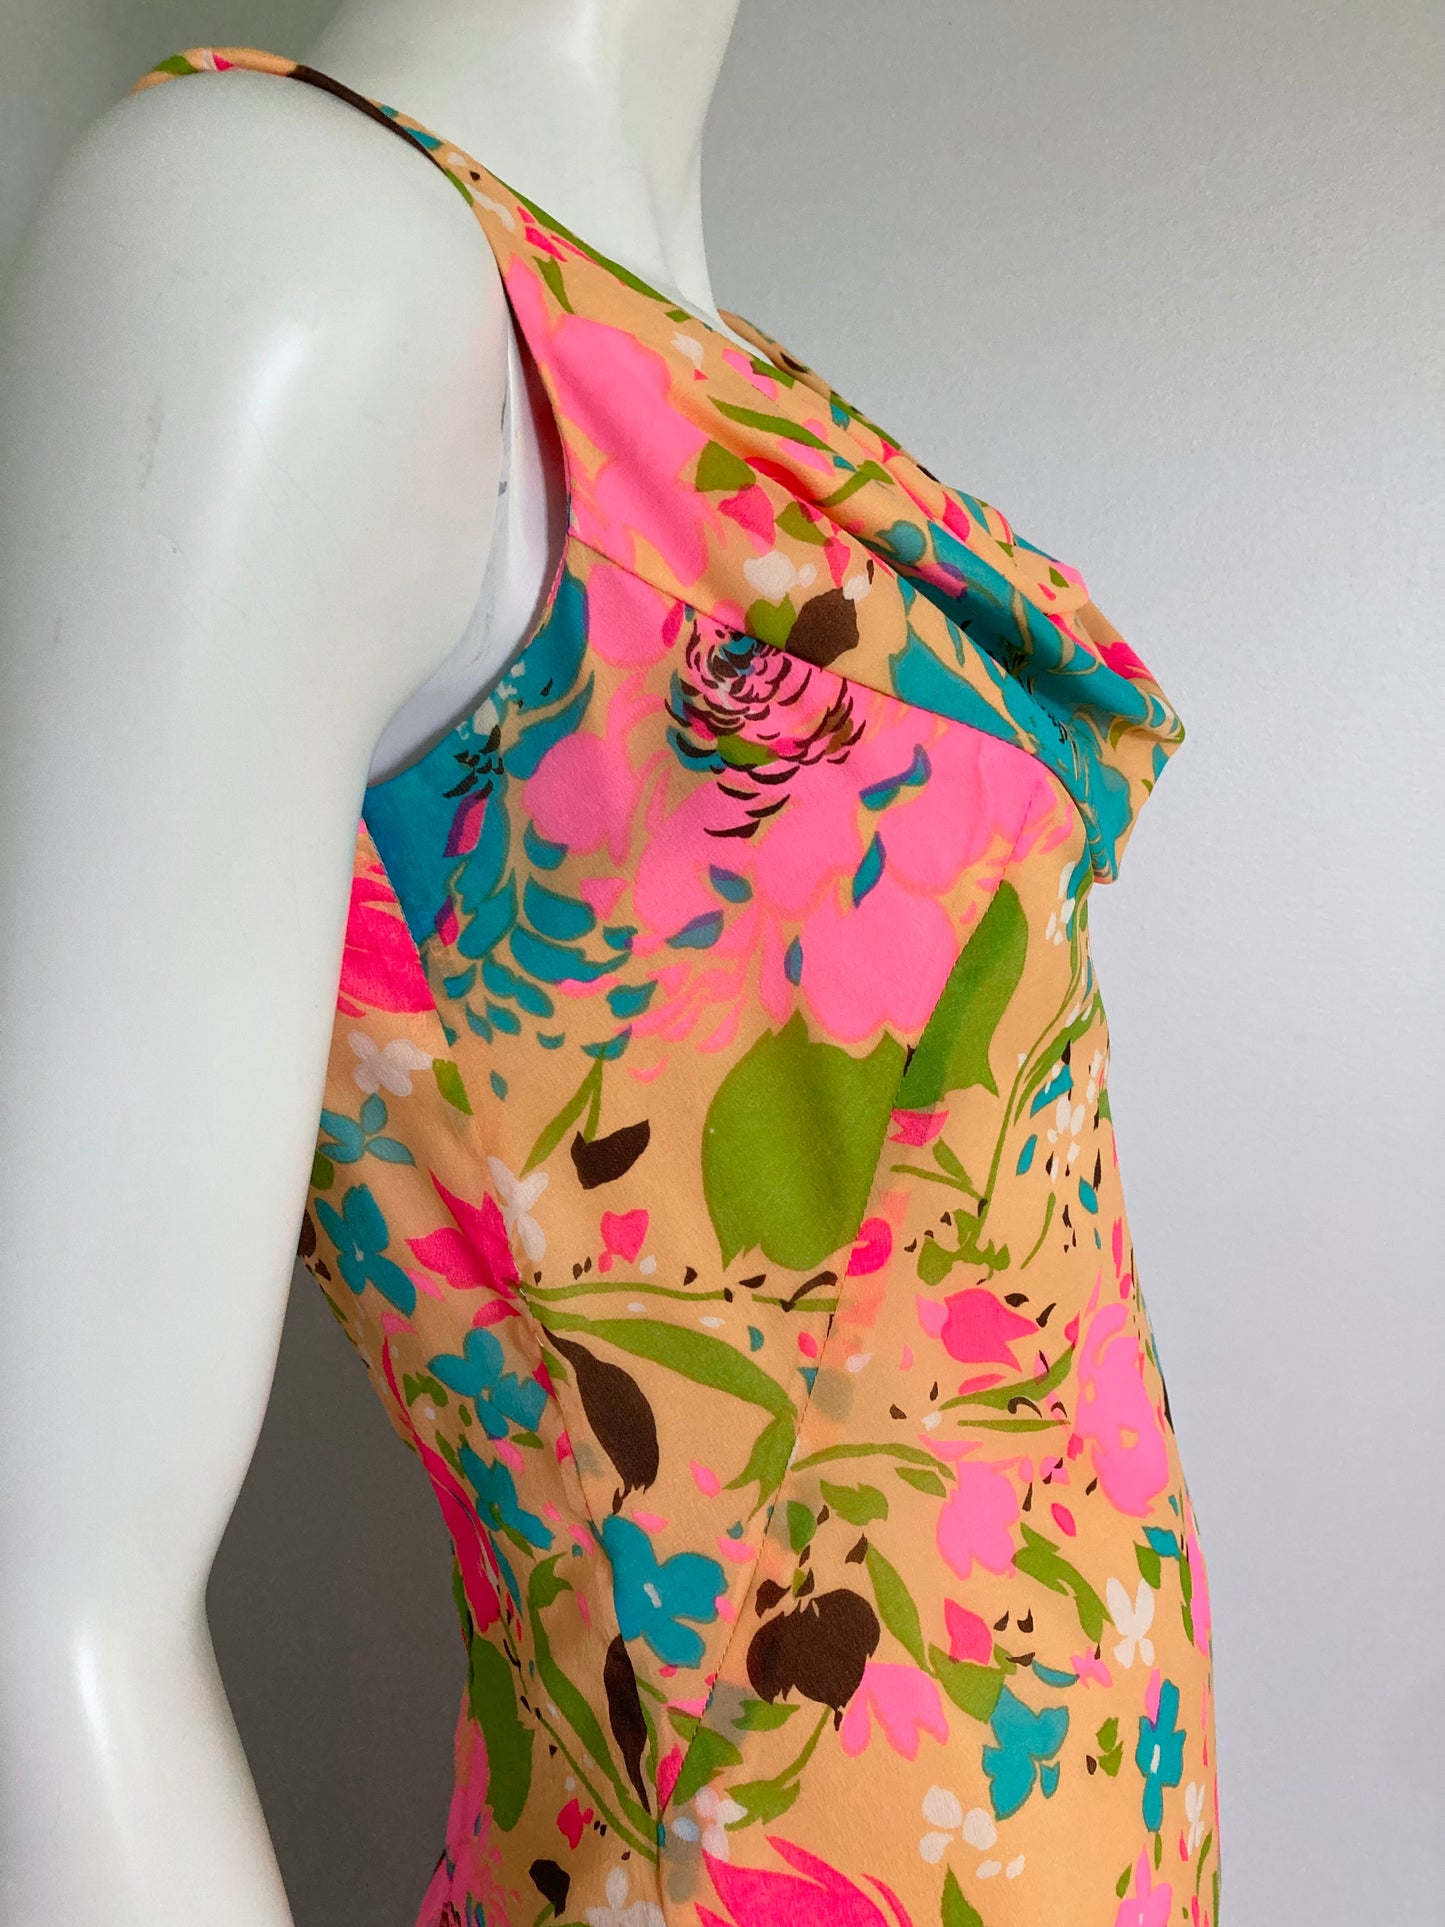 1960/70s Bright Crinkle Chiffon Summer Shift by Jack Marsee, Size S